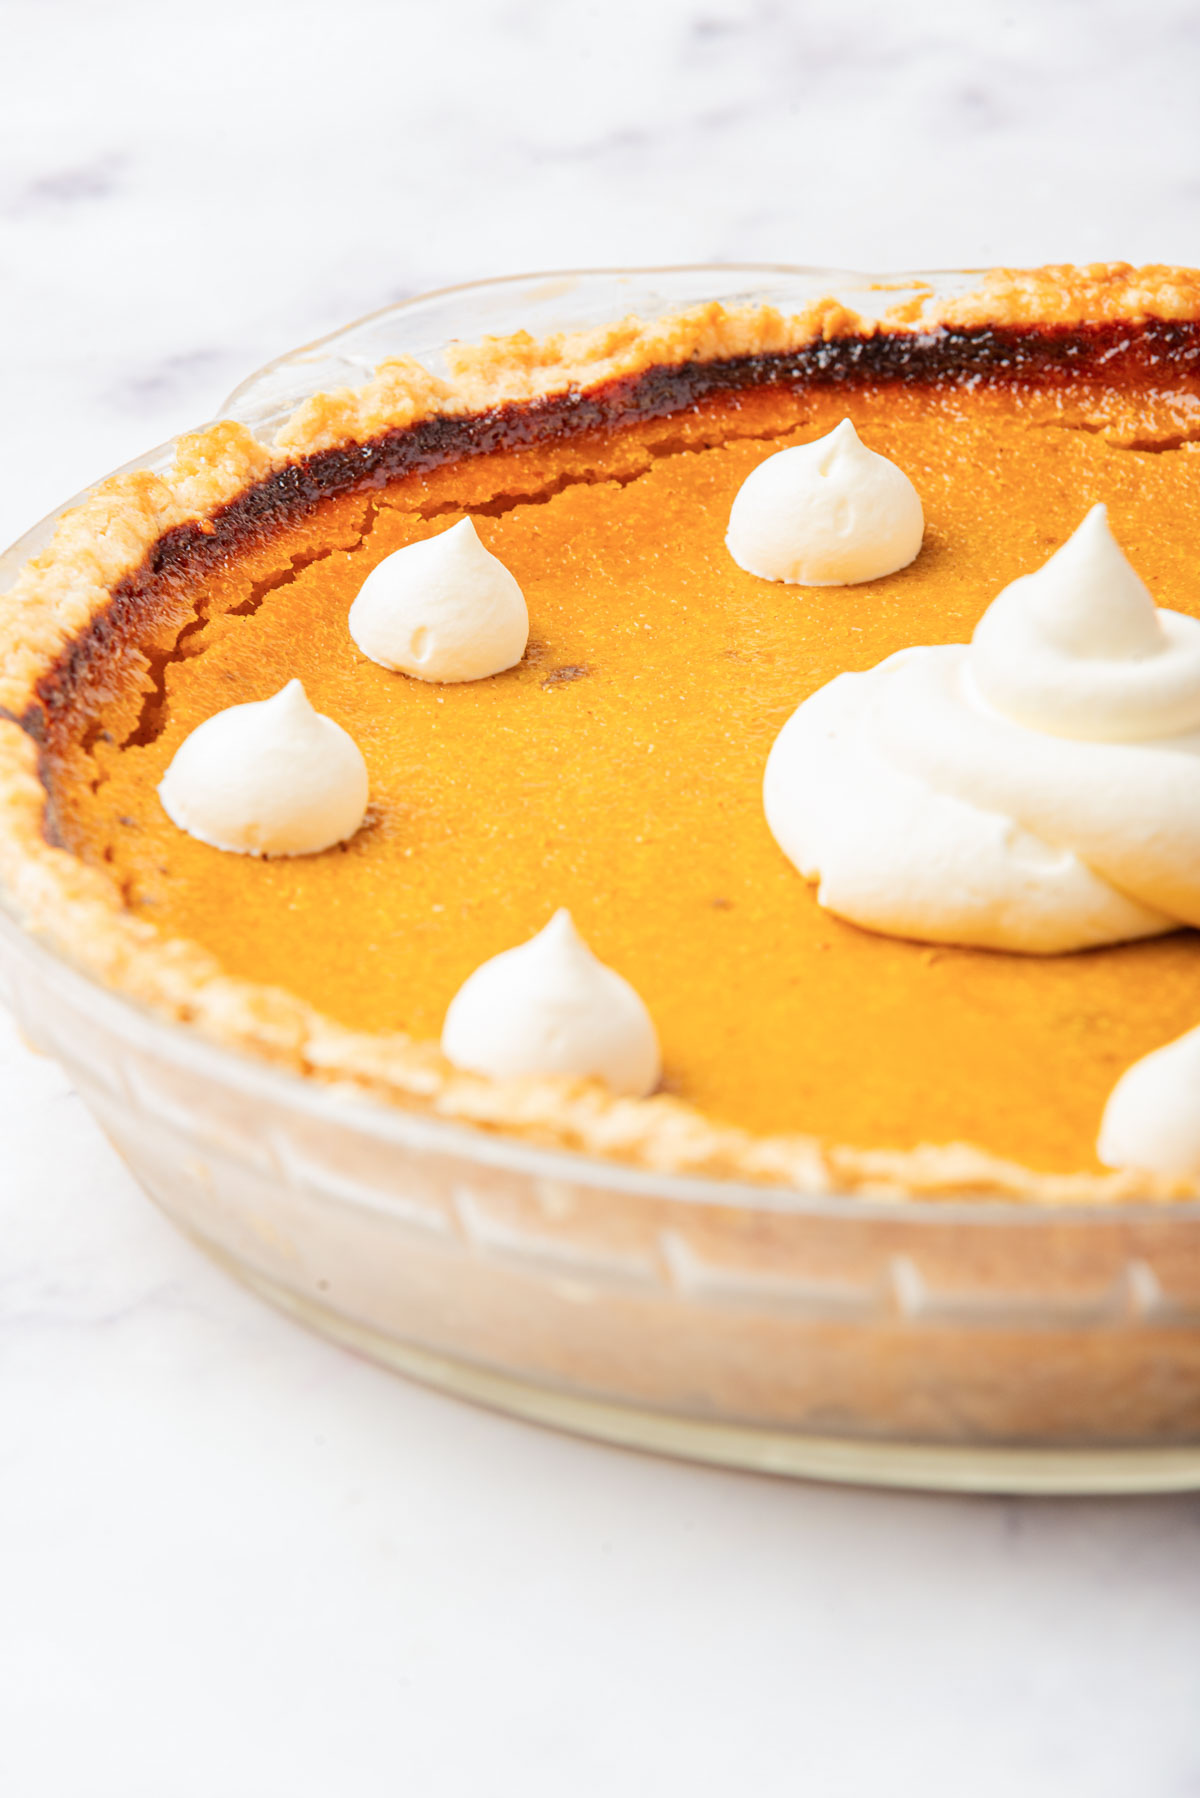 An overhead view of a pumpkin pie with one slice removed, revealing the pie's interior and smooth filling, decorated with dollops of whipped cream.